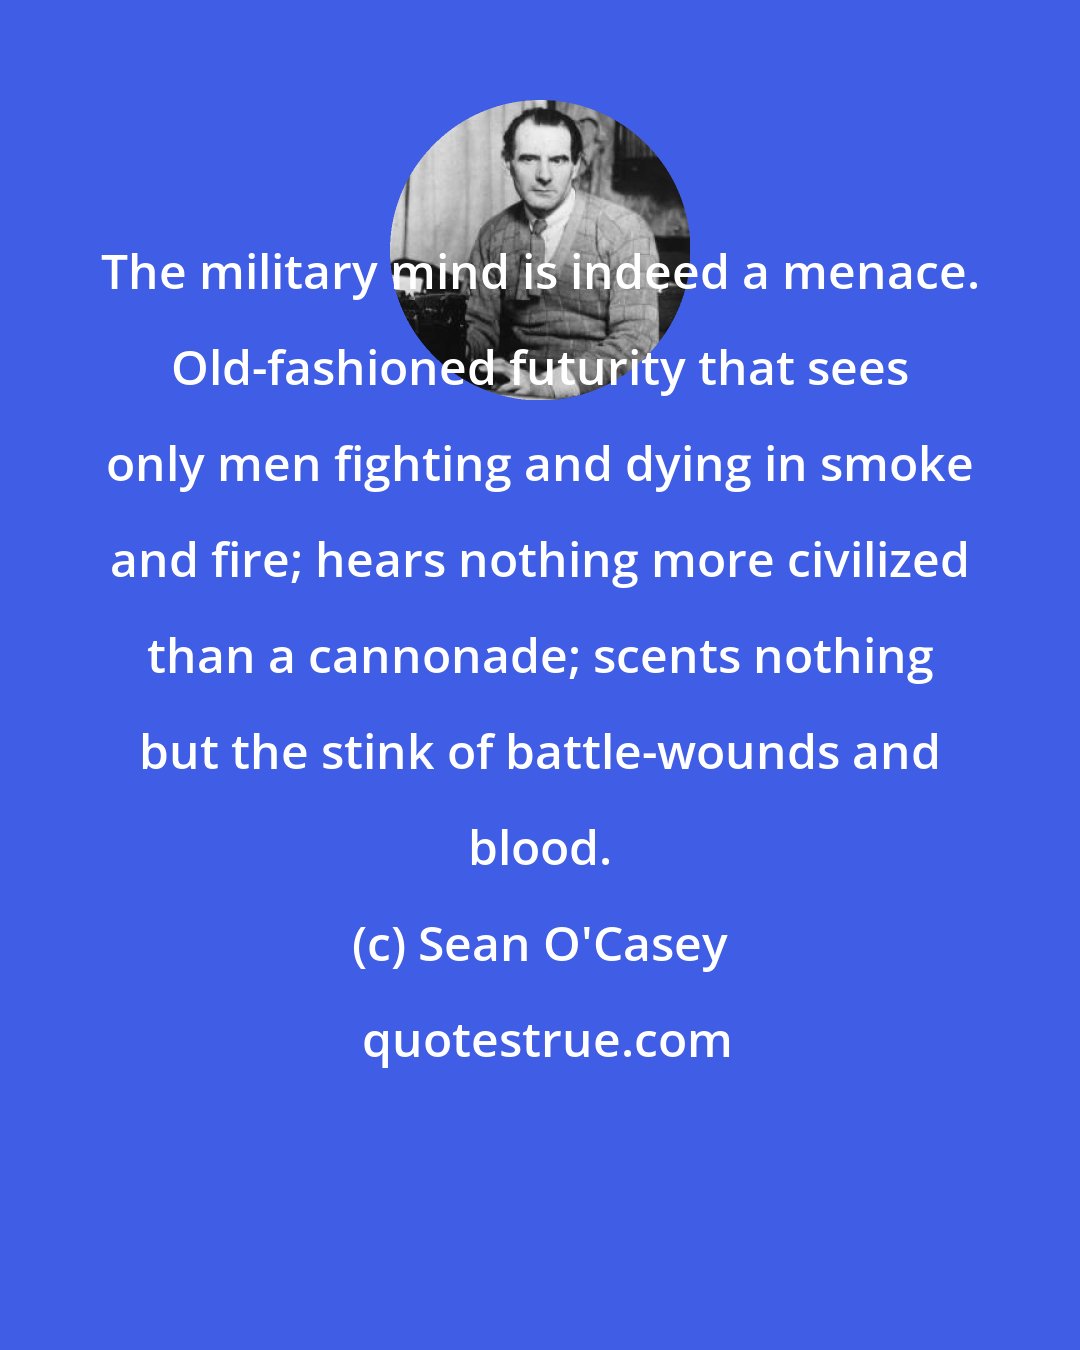 Sean O'Casey: The military mind is indeed a menace. Old-fashioned futurity that sees only men fighting and dying in smoke and fire; hears nothing more civilized than a cannonade; scents nothing but the stink of battle-wounds and blood.